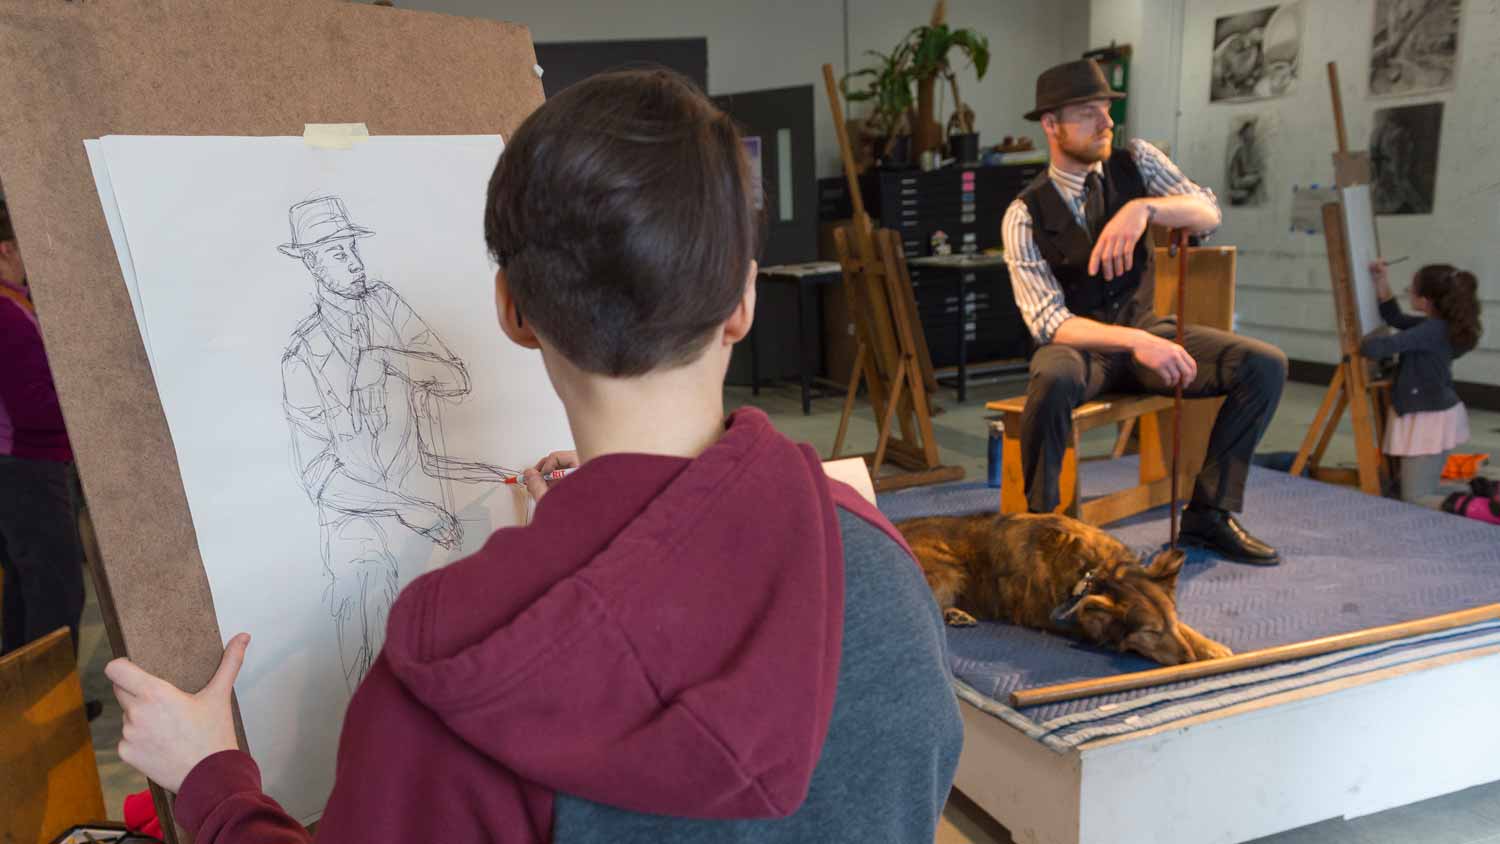 A model with a hat on posing for a student drawing him